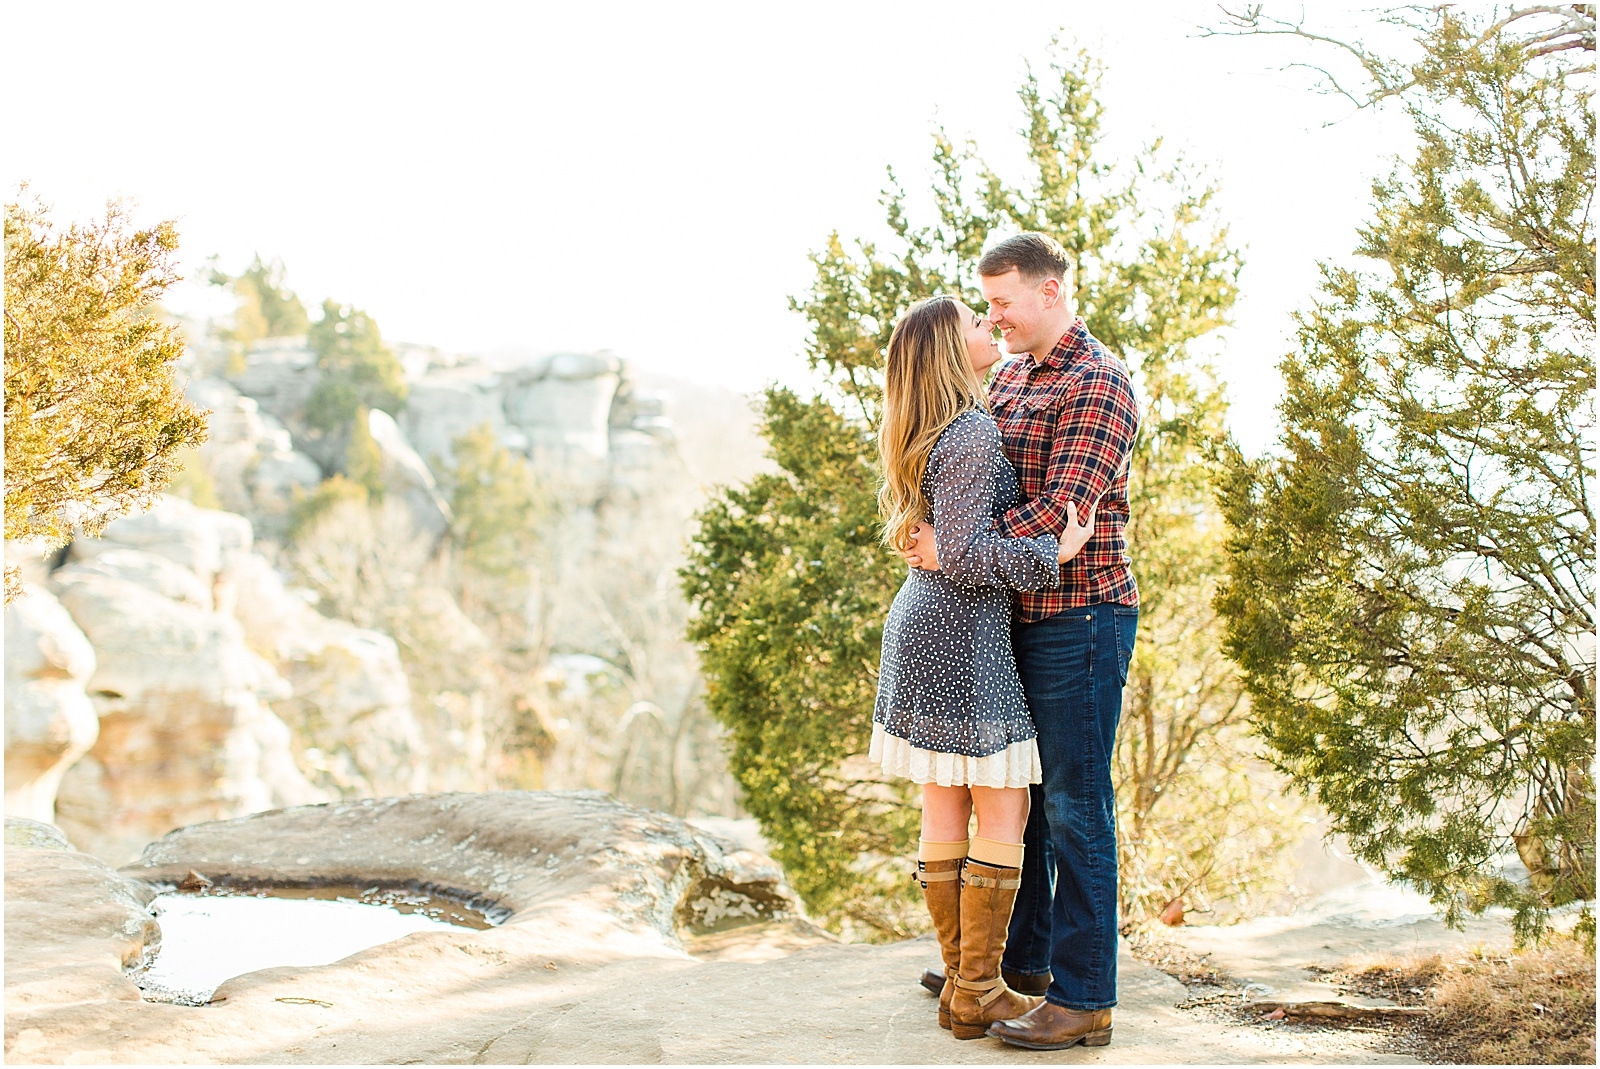 A Sunny Garden of the Gods Engagement Session | Shiloh and Lee | Bret and Brandie Photography015.jpg